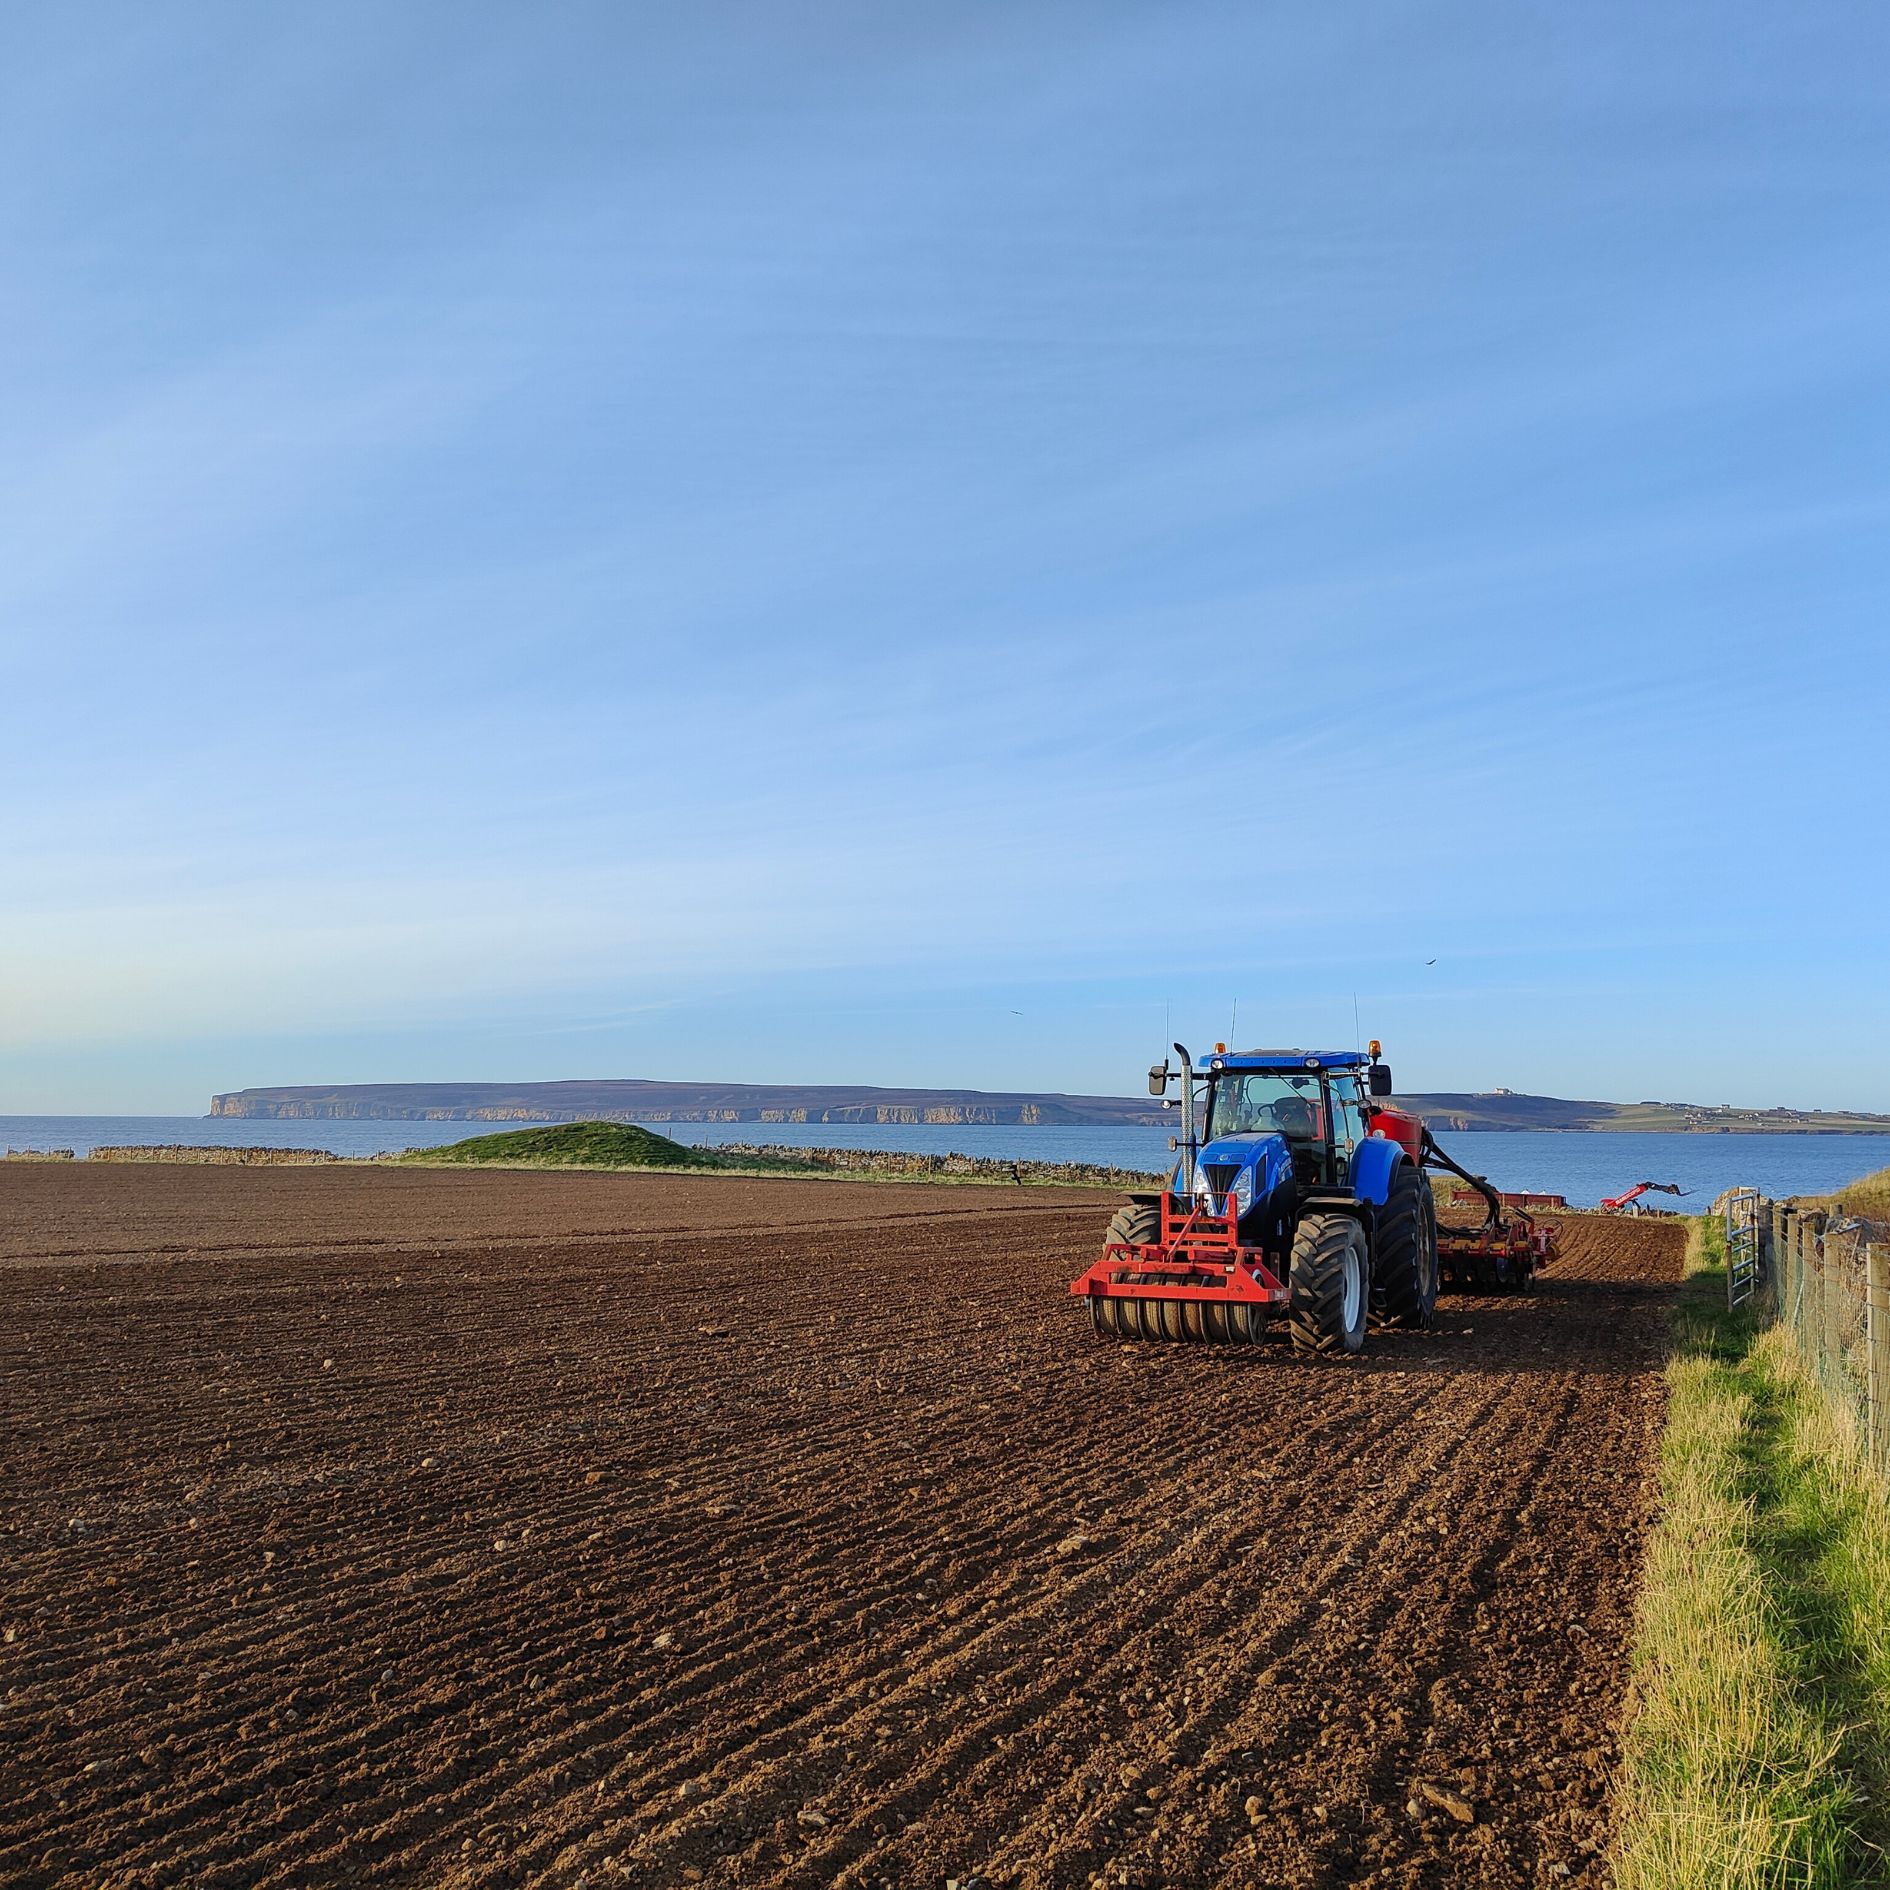 Sowing the barley image